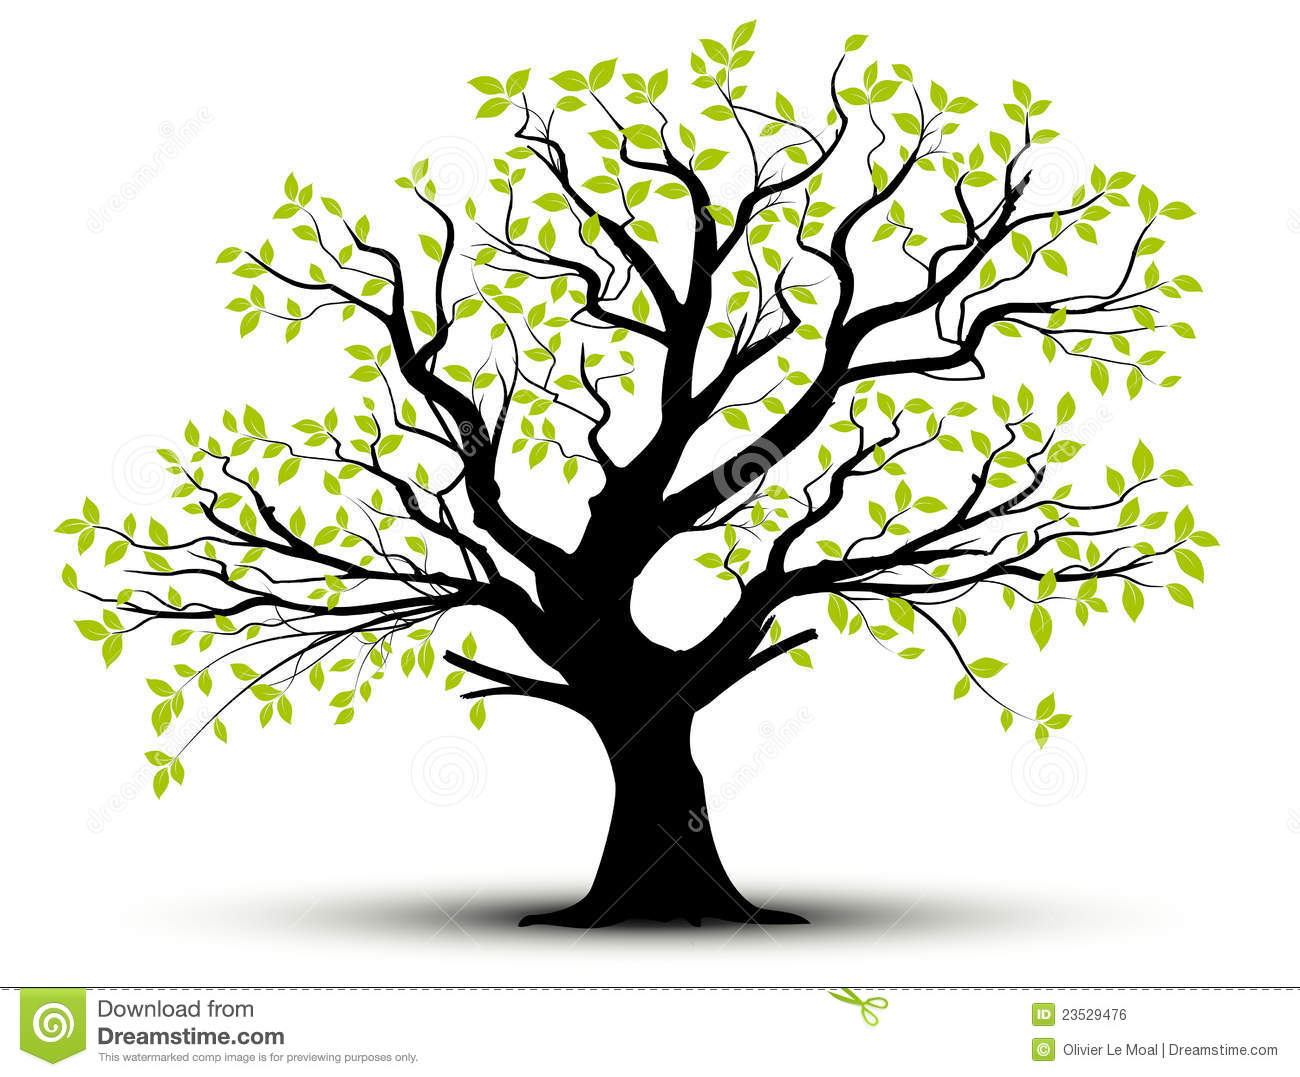 Tree Silhouette with Roots and Leaves